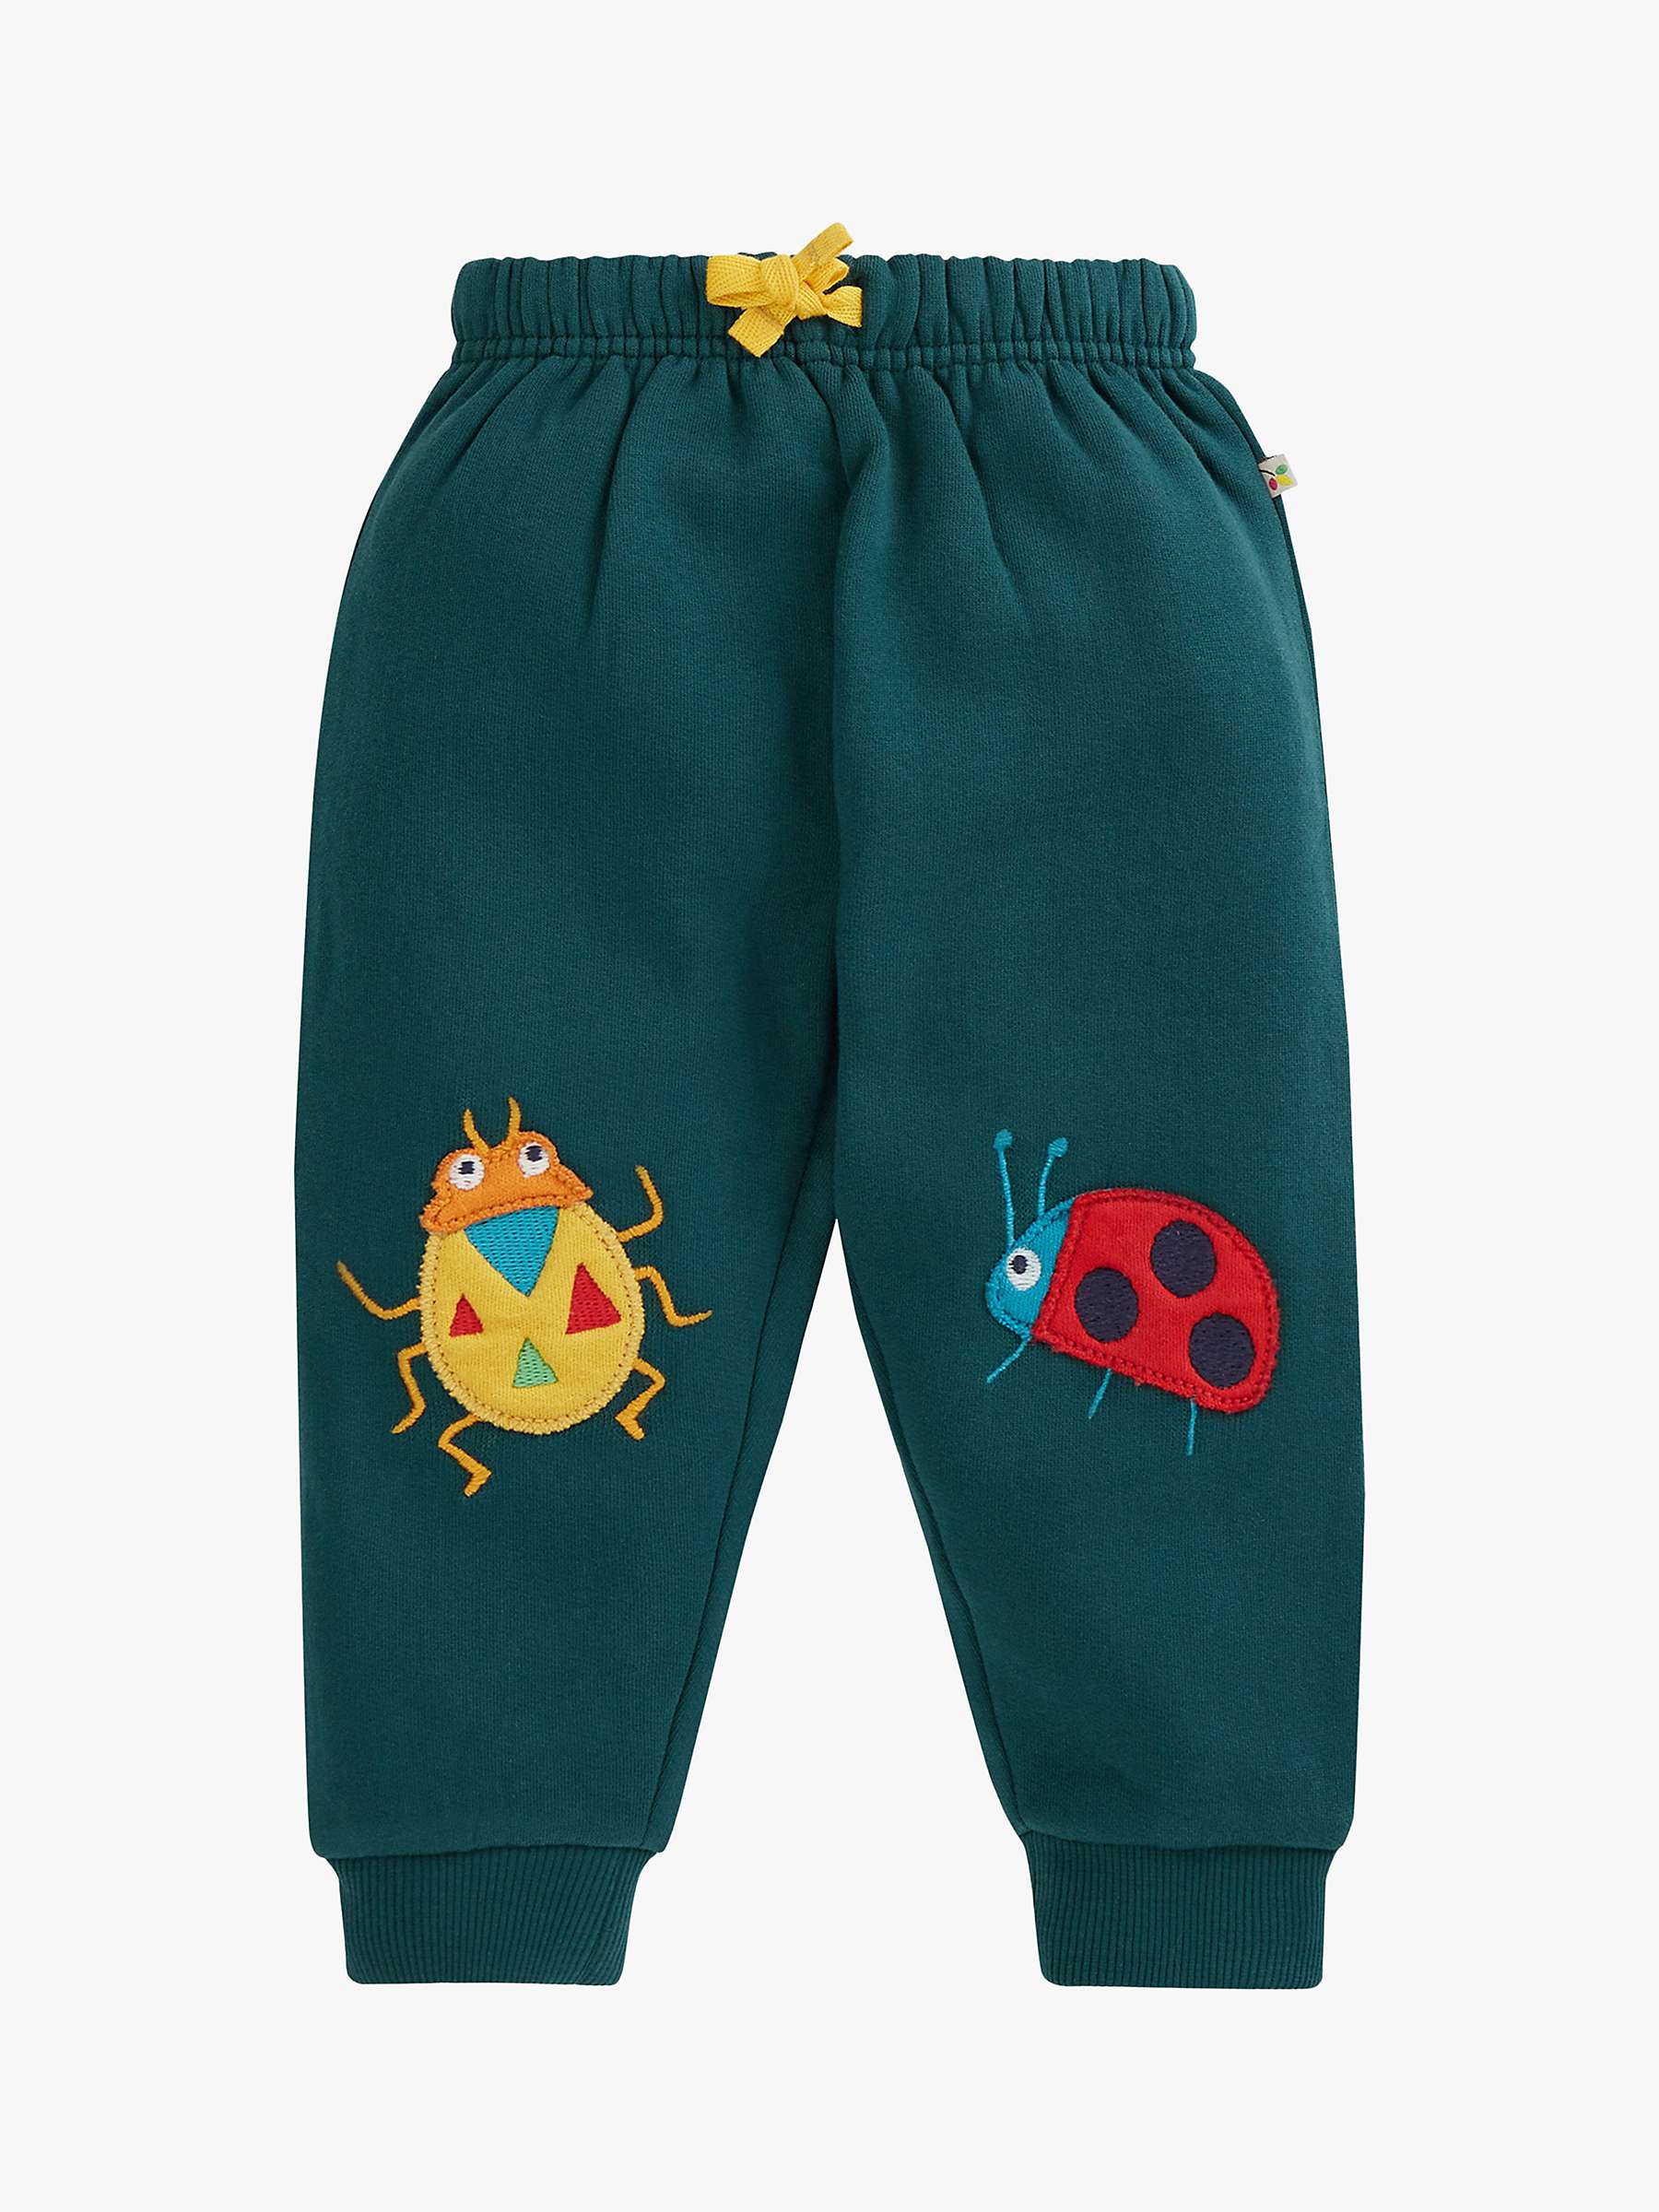 Buy Frugi Kids' Character Crawlers Joggers, Fir Tree Online at johnlewis.com